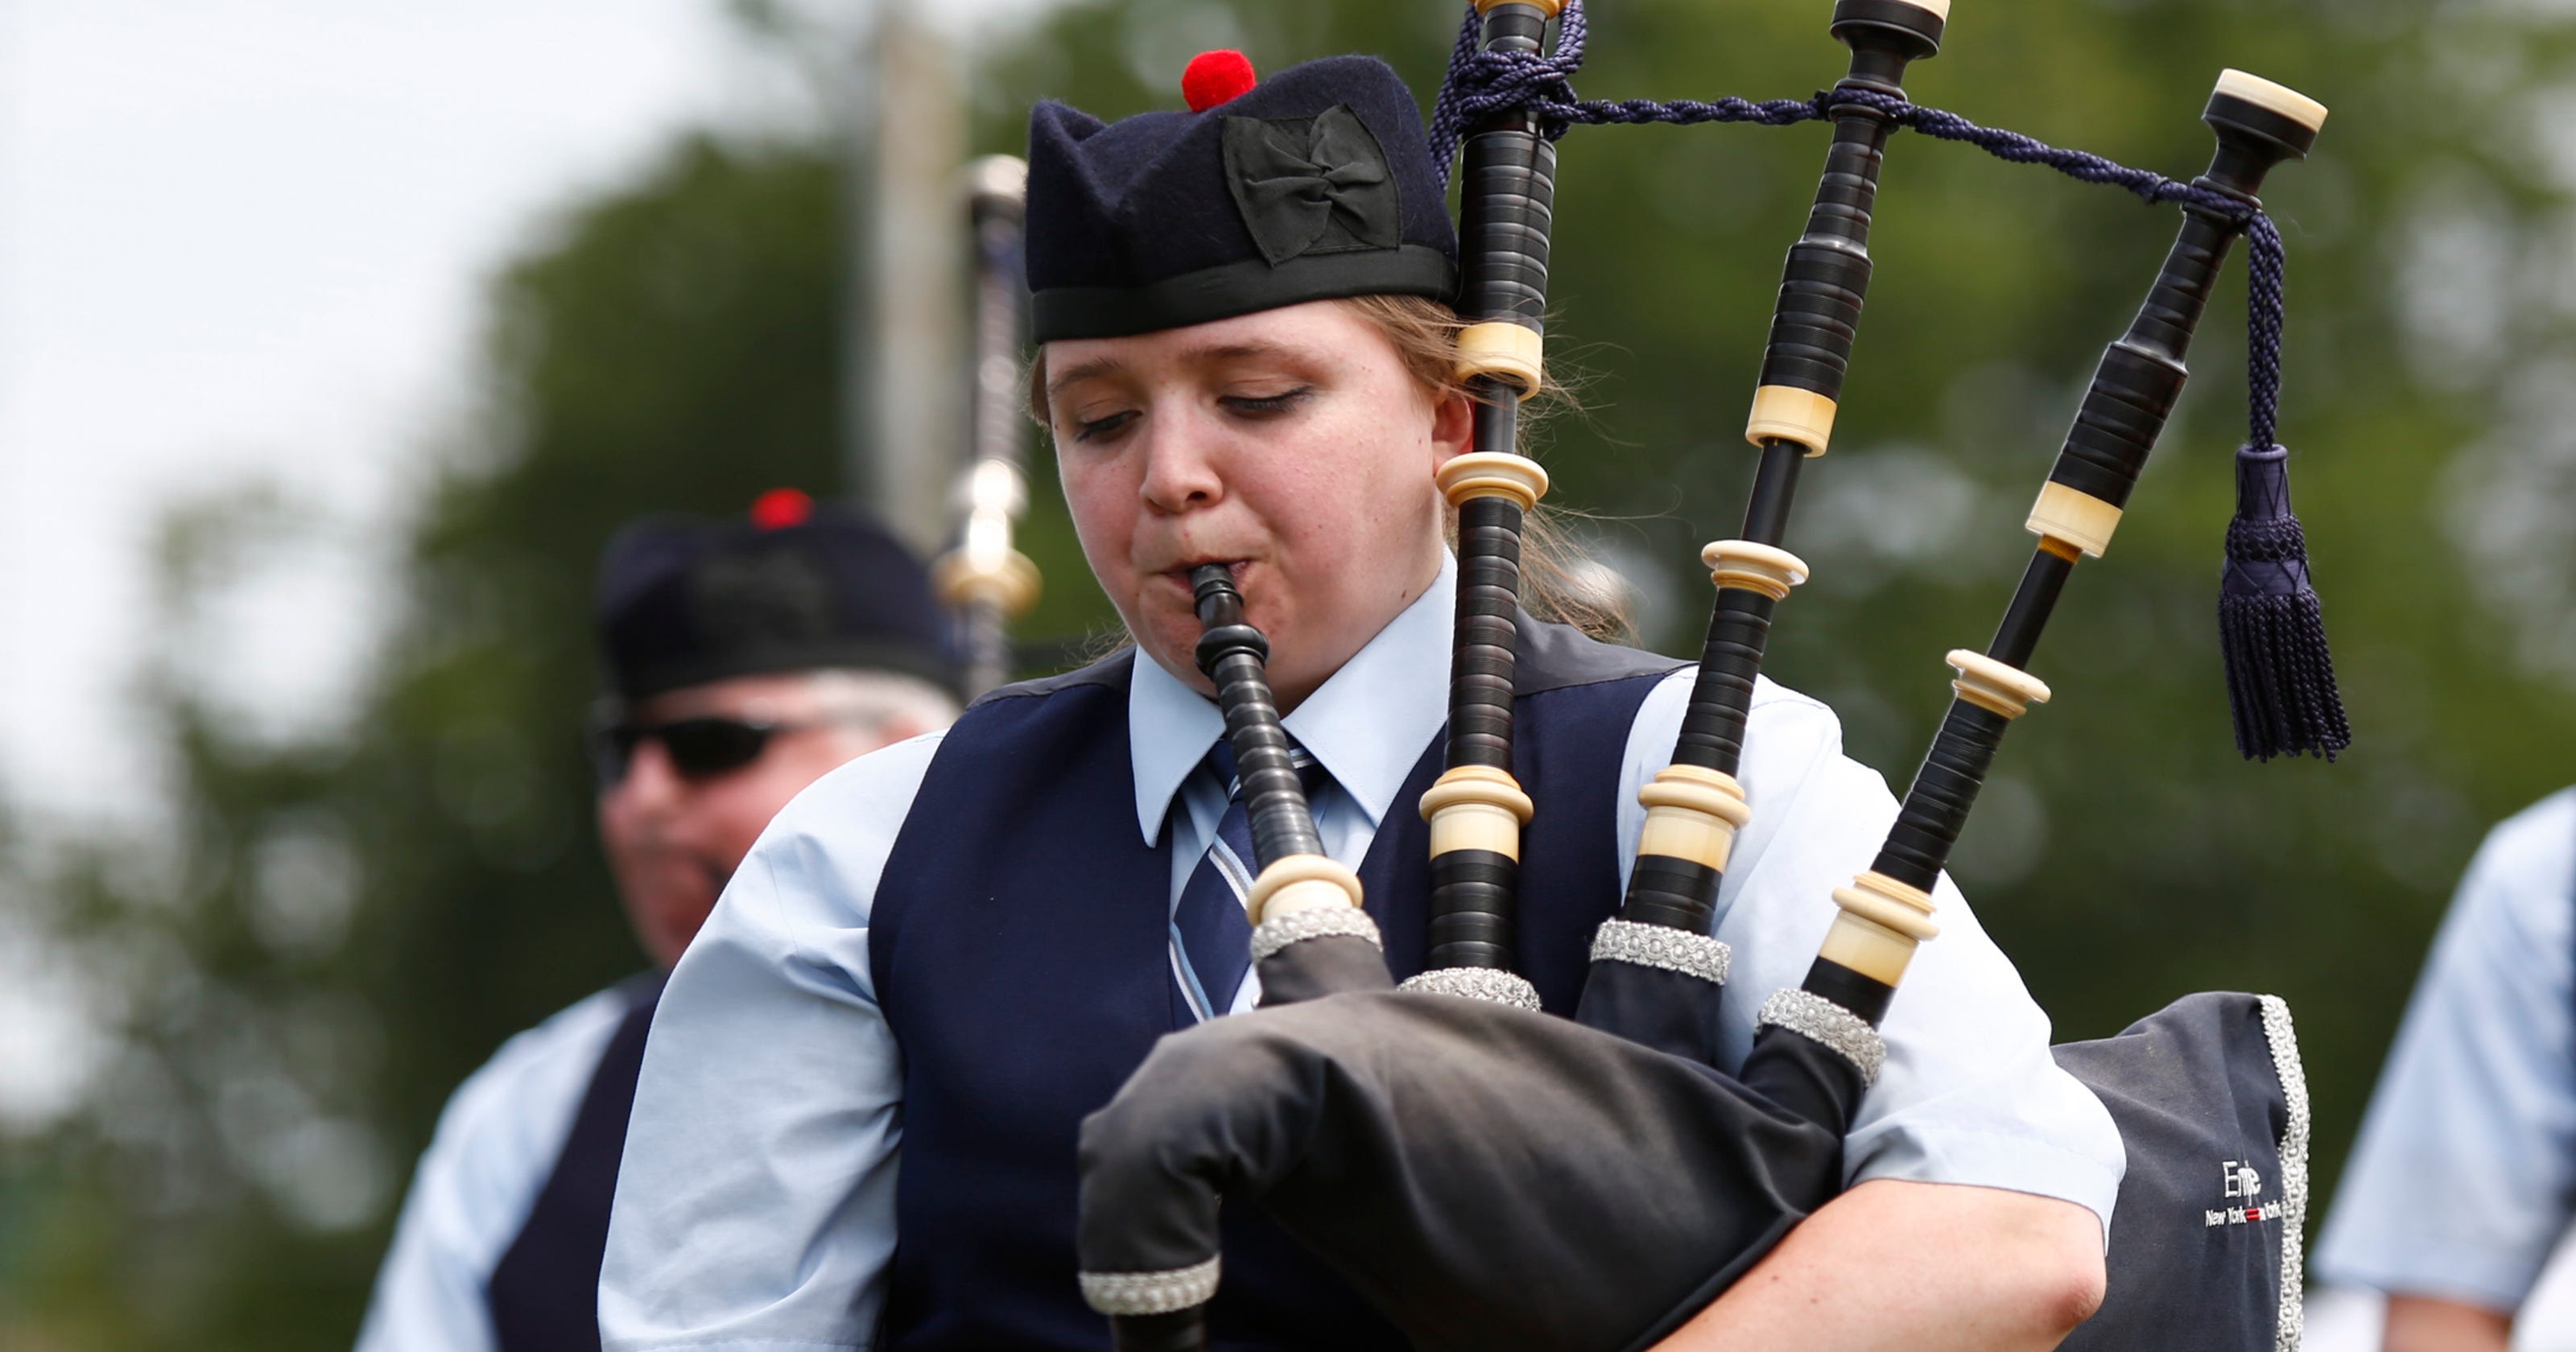 Bagpipes, drums compete at Ceol Mor Bagpipe Competition and Festival